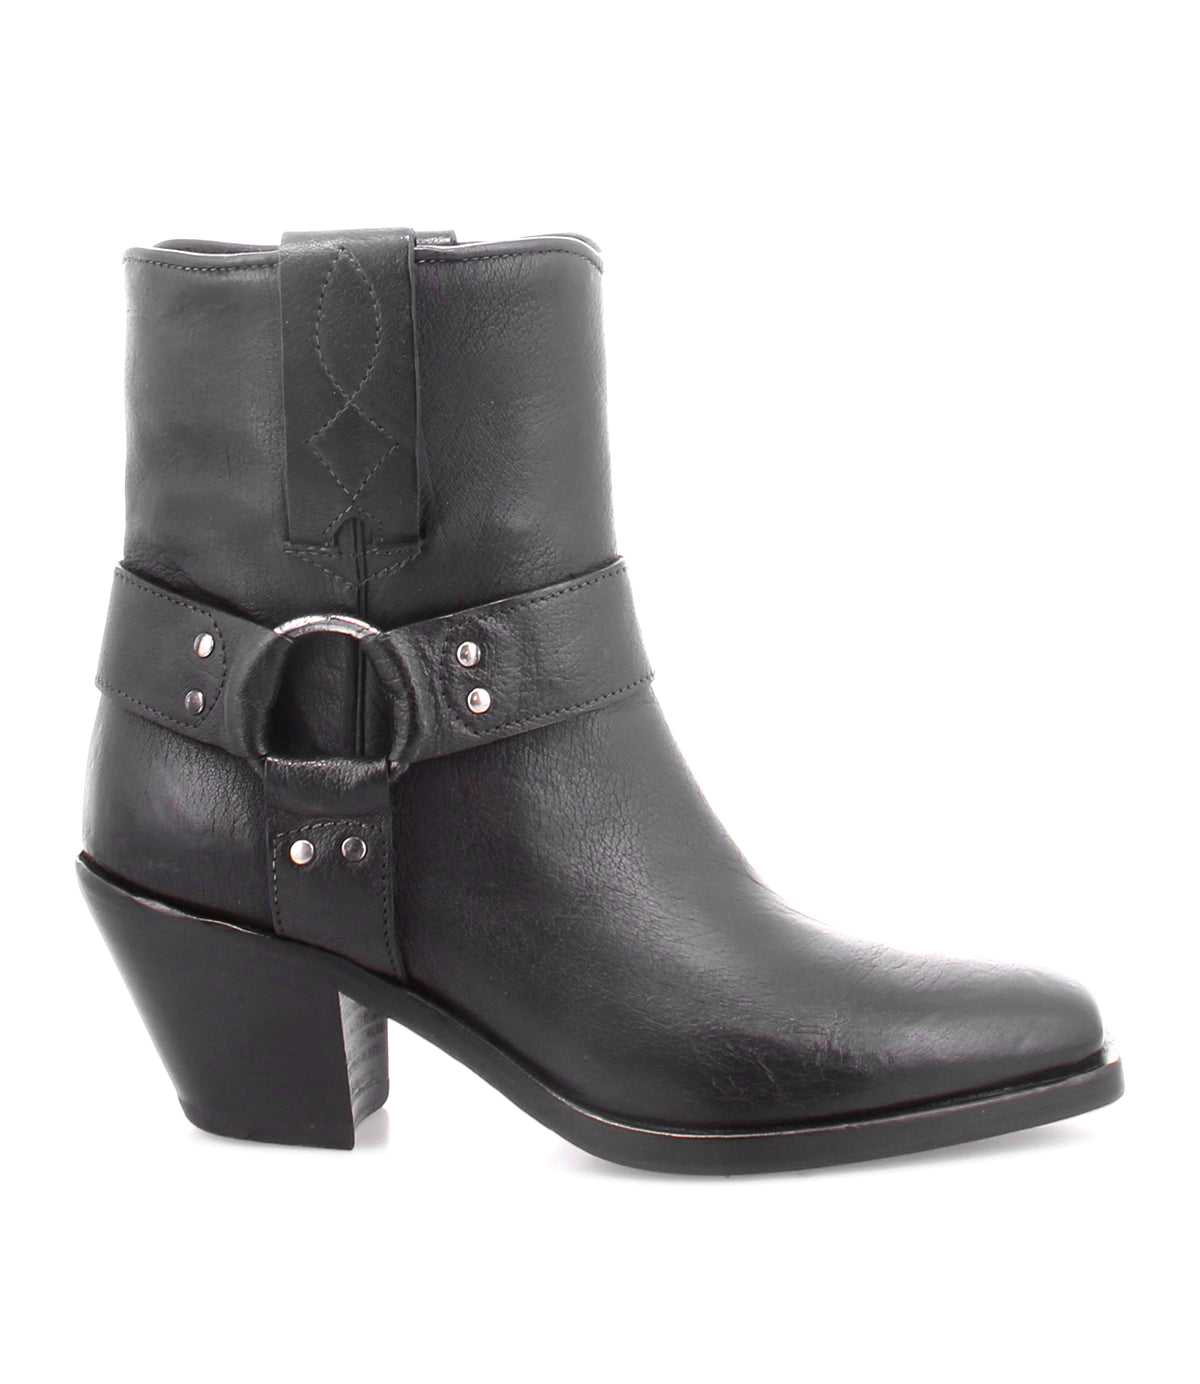 An Italian women's black leather ankle boot with buckles, the "Vamoose" by Bed Stu.